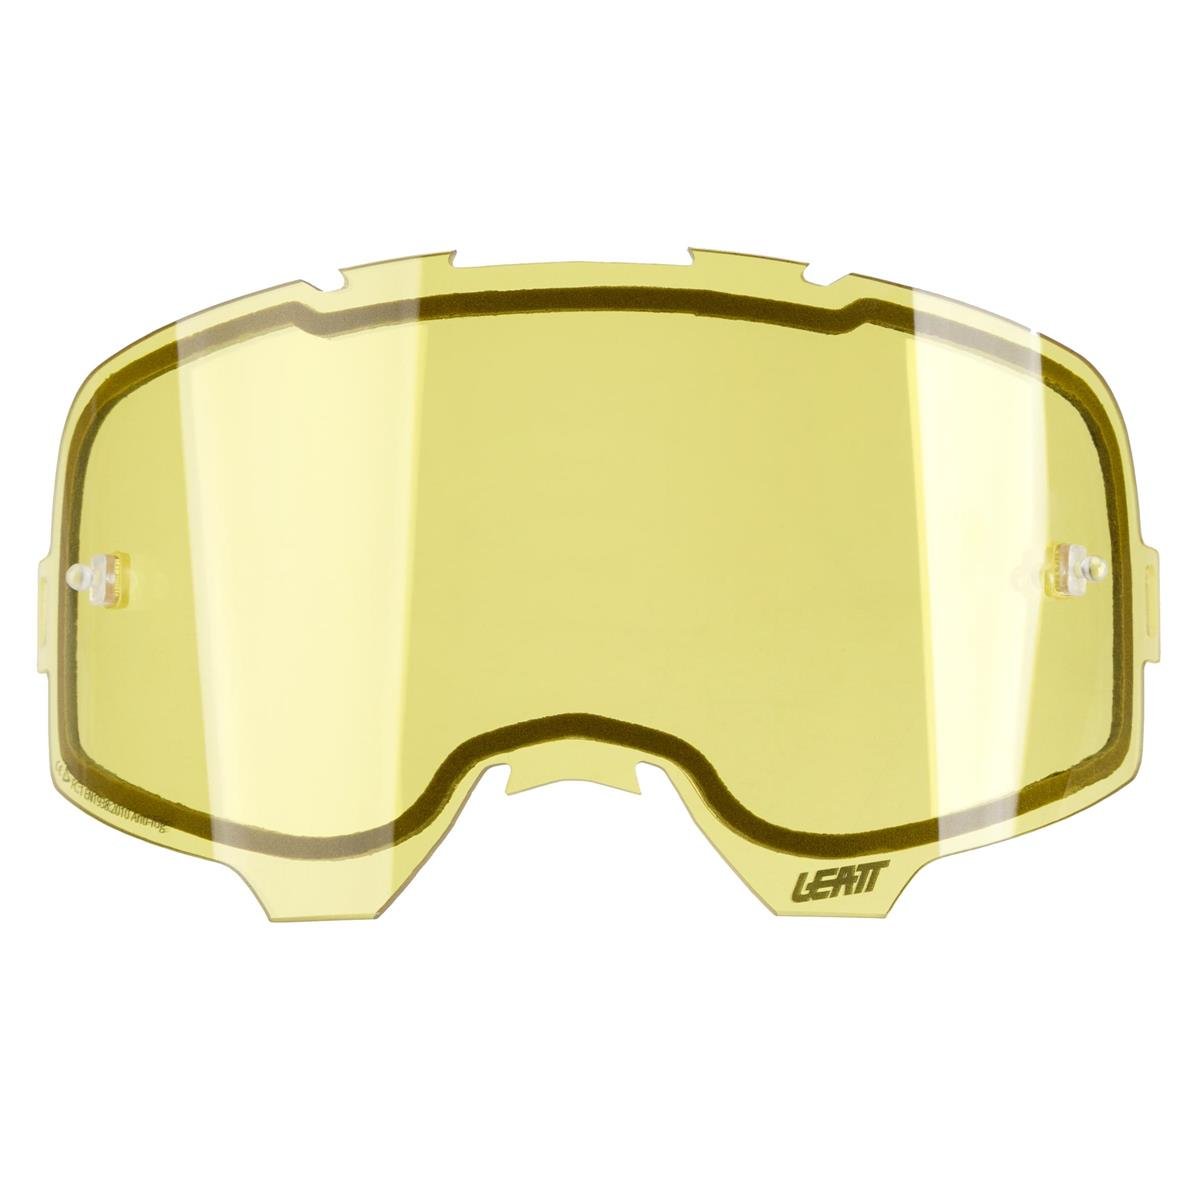 Leatt Replacement Lens Velocity Yellow - Clear Anti-Fog